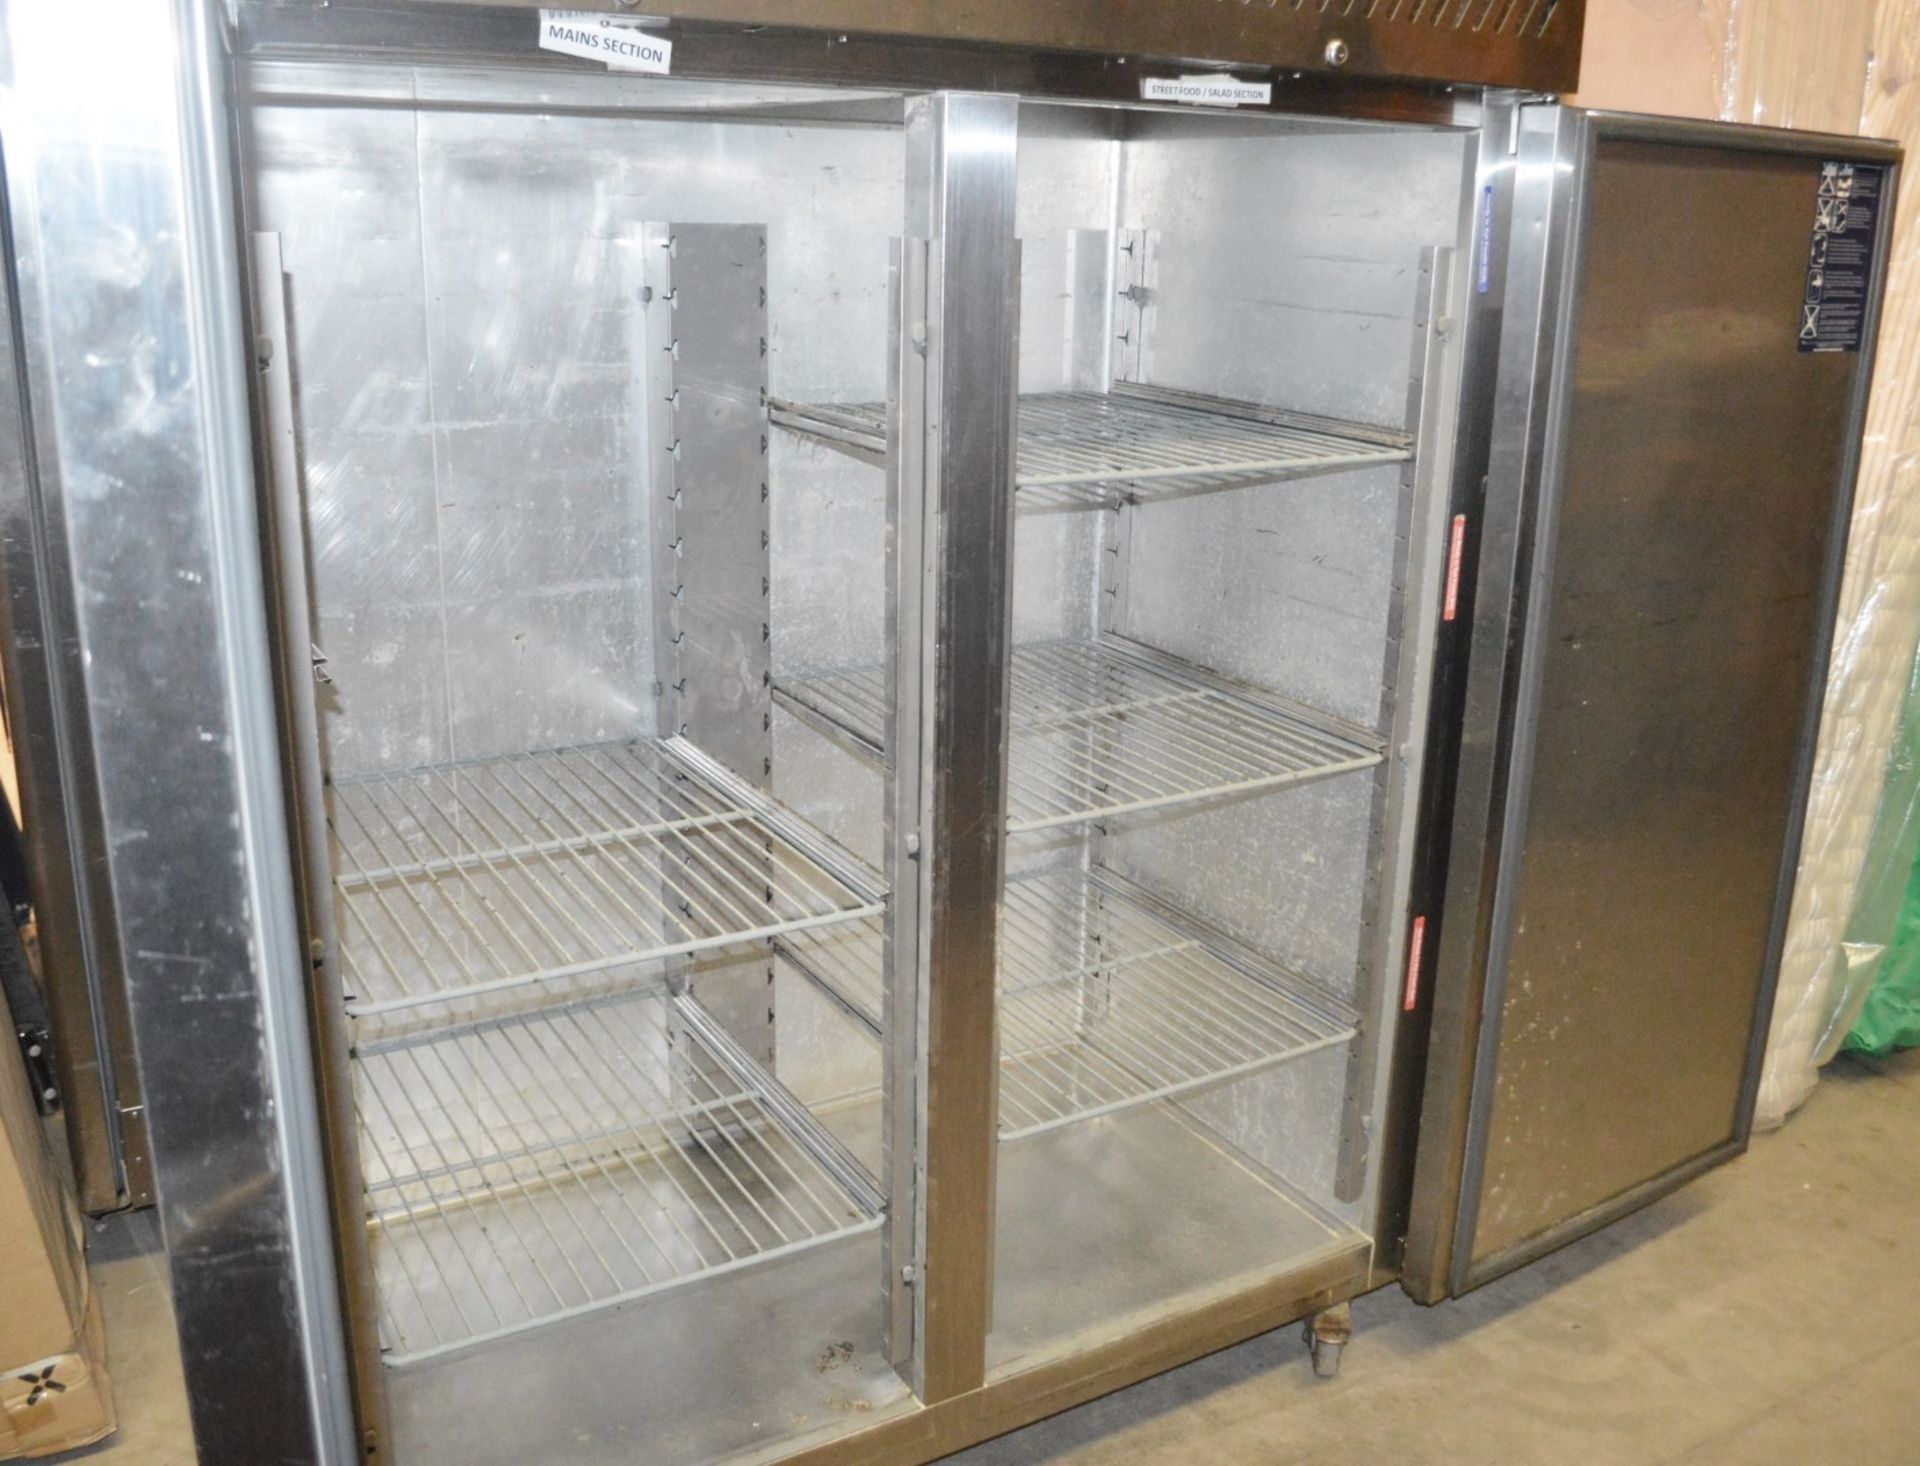 1 x WILLIAMS Upright 2-Door Stainless Steel Commercial Chiller Unit - Dimensions: H195 x W140 x - Image 8 of 12